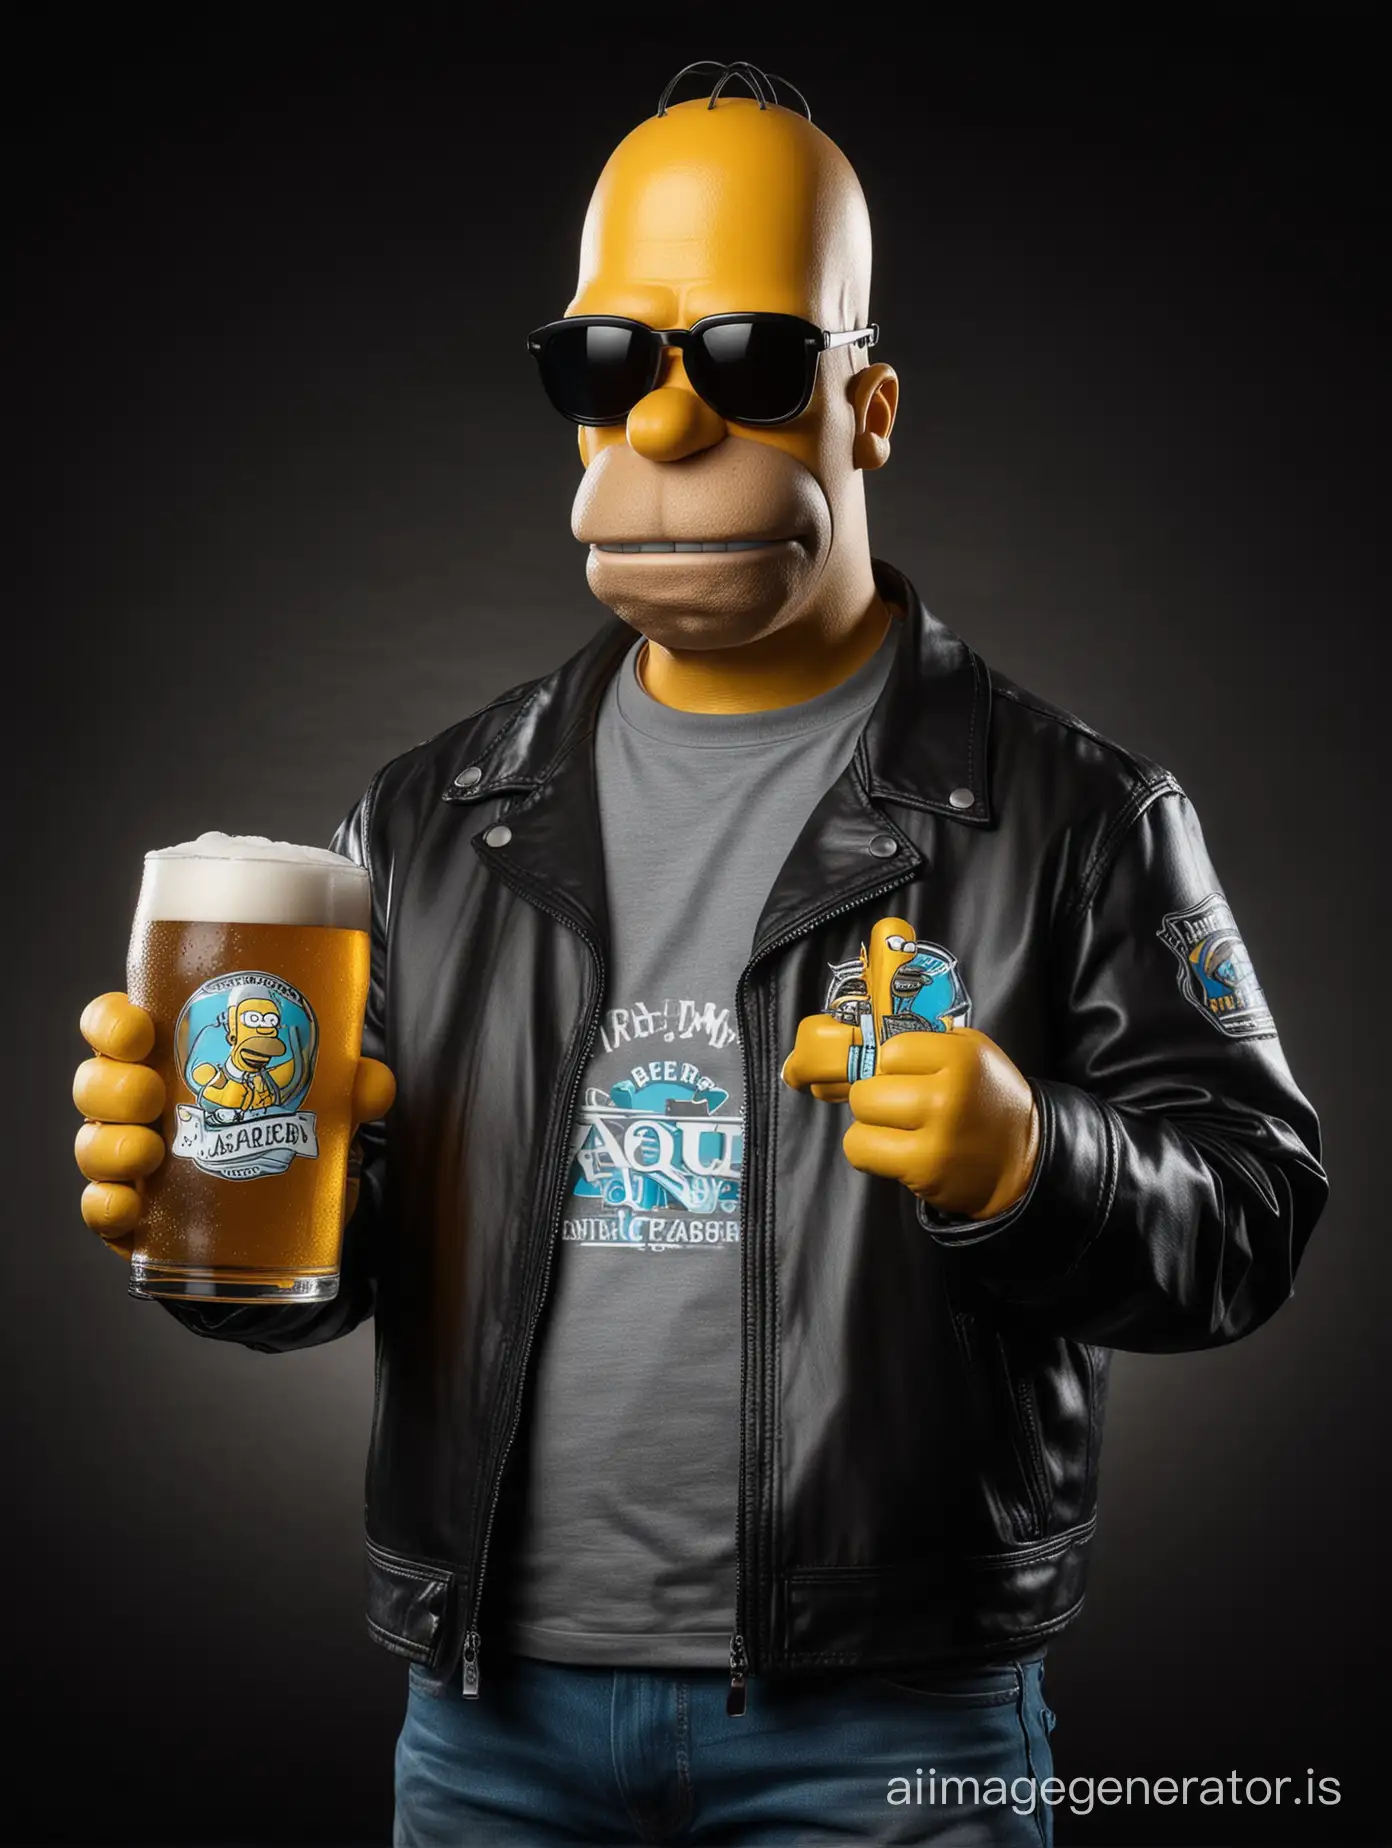 imagine Homer Simpson wearing sunglasses, black leather jacket with a logo that says "Aqua". Holding a beer, looking ahead smiling. Studio photo. network backlighting. Clean black background